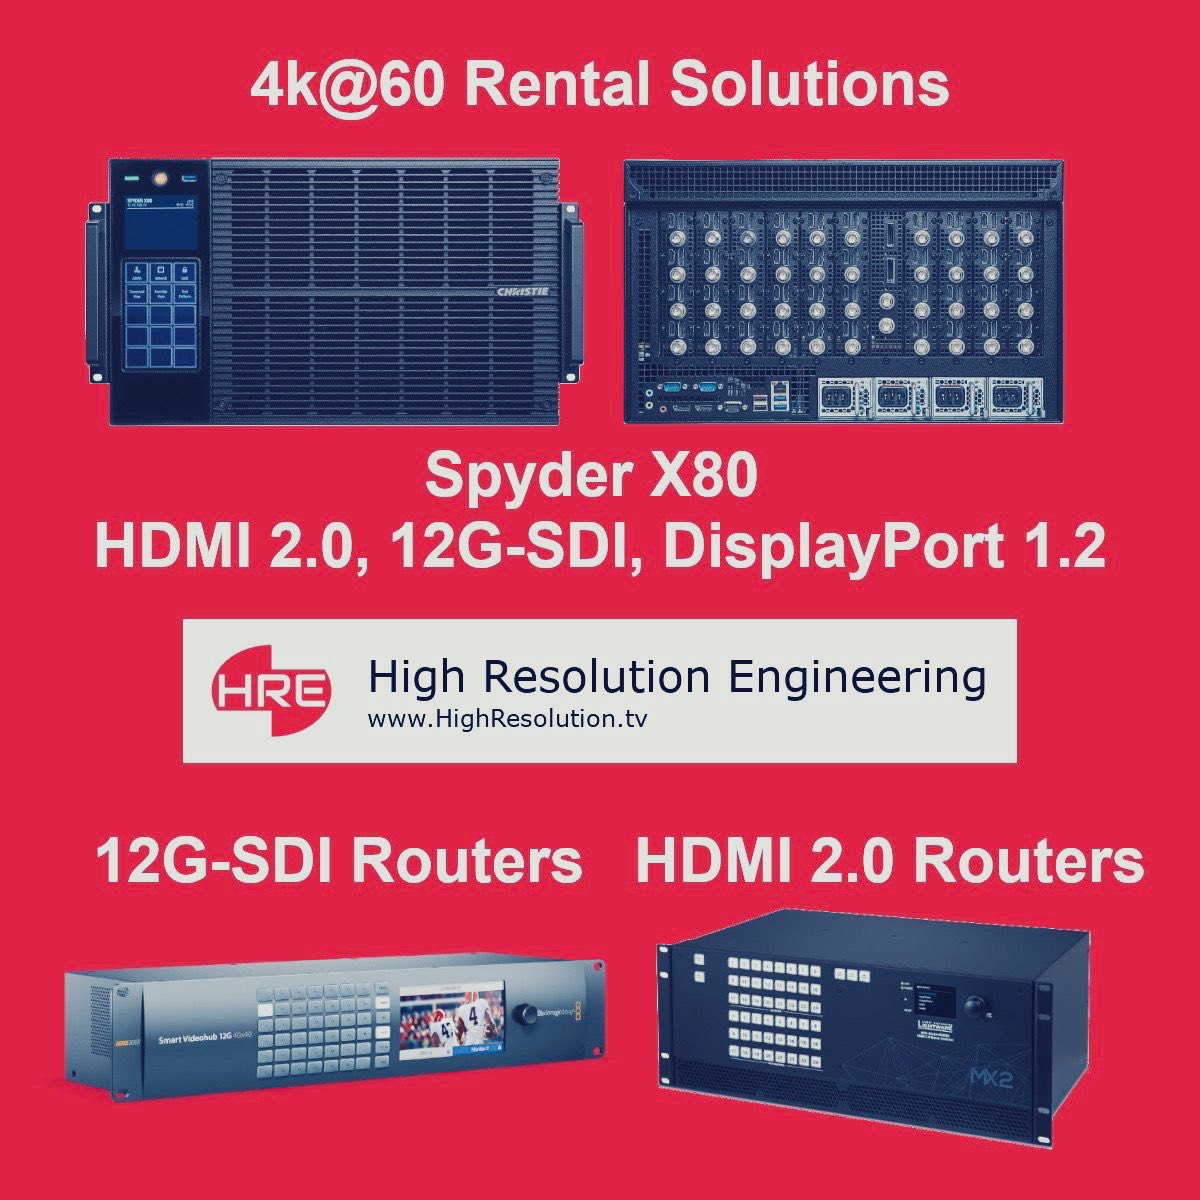 4K@60 AV rental solutions from a partner you can trust. Contact us to discuss your upcoming event and let us show you the HRE difference. #LiveExtraordinary #HREsolutions #RentAV #AVrentals #4K 
highresolution.tv/contact/